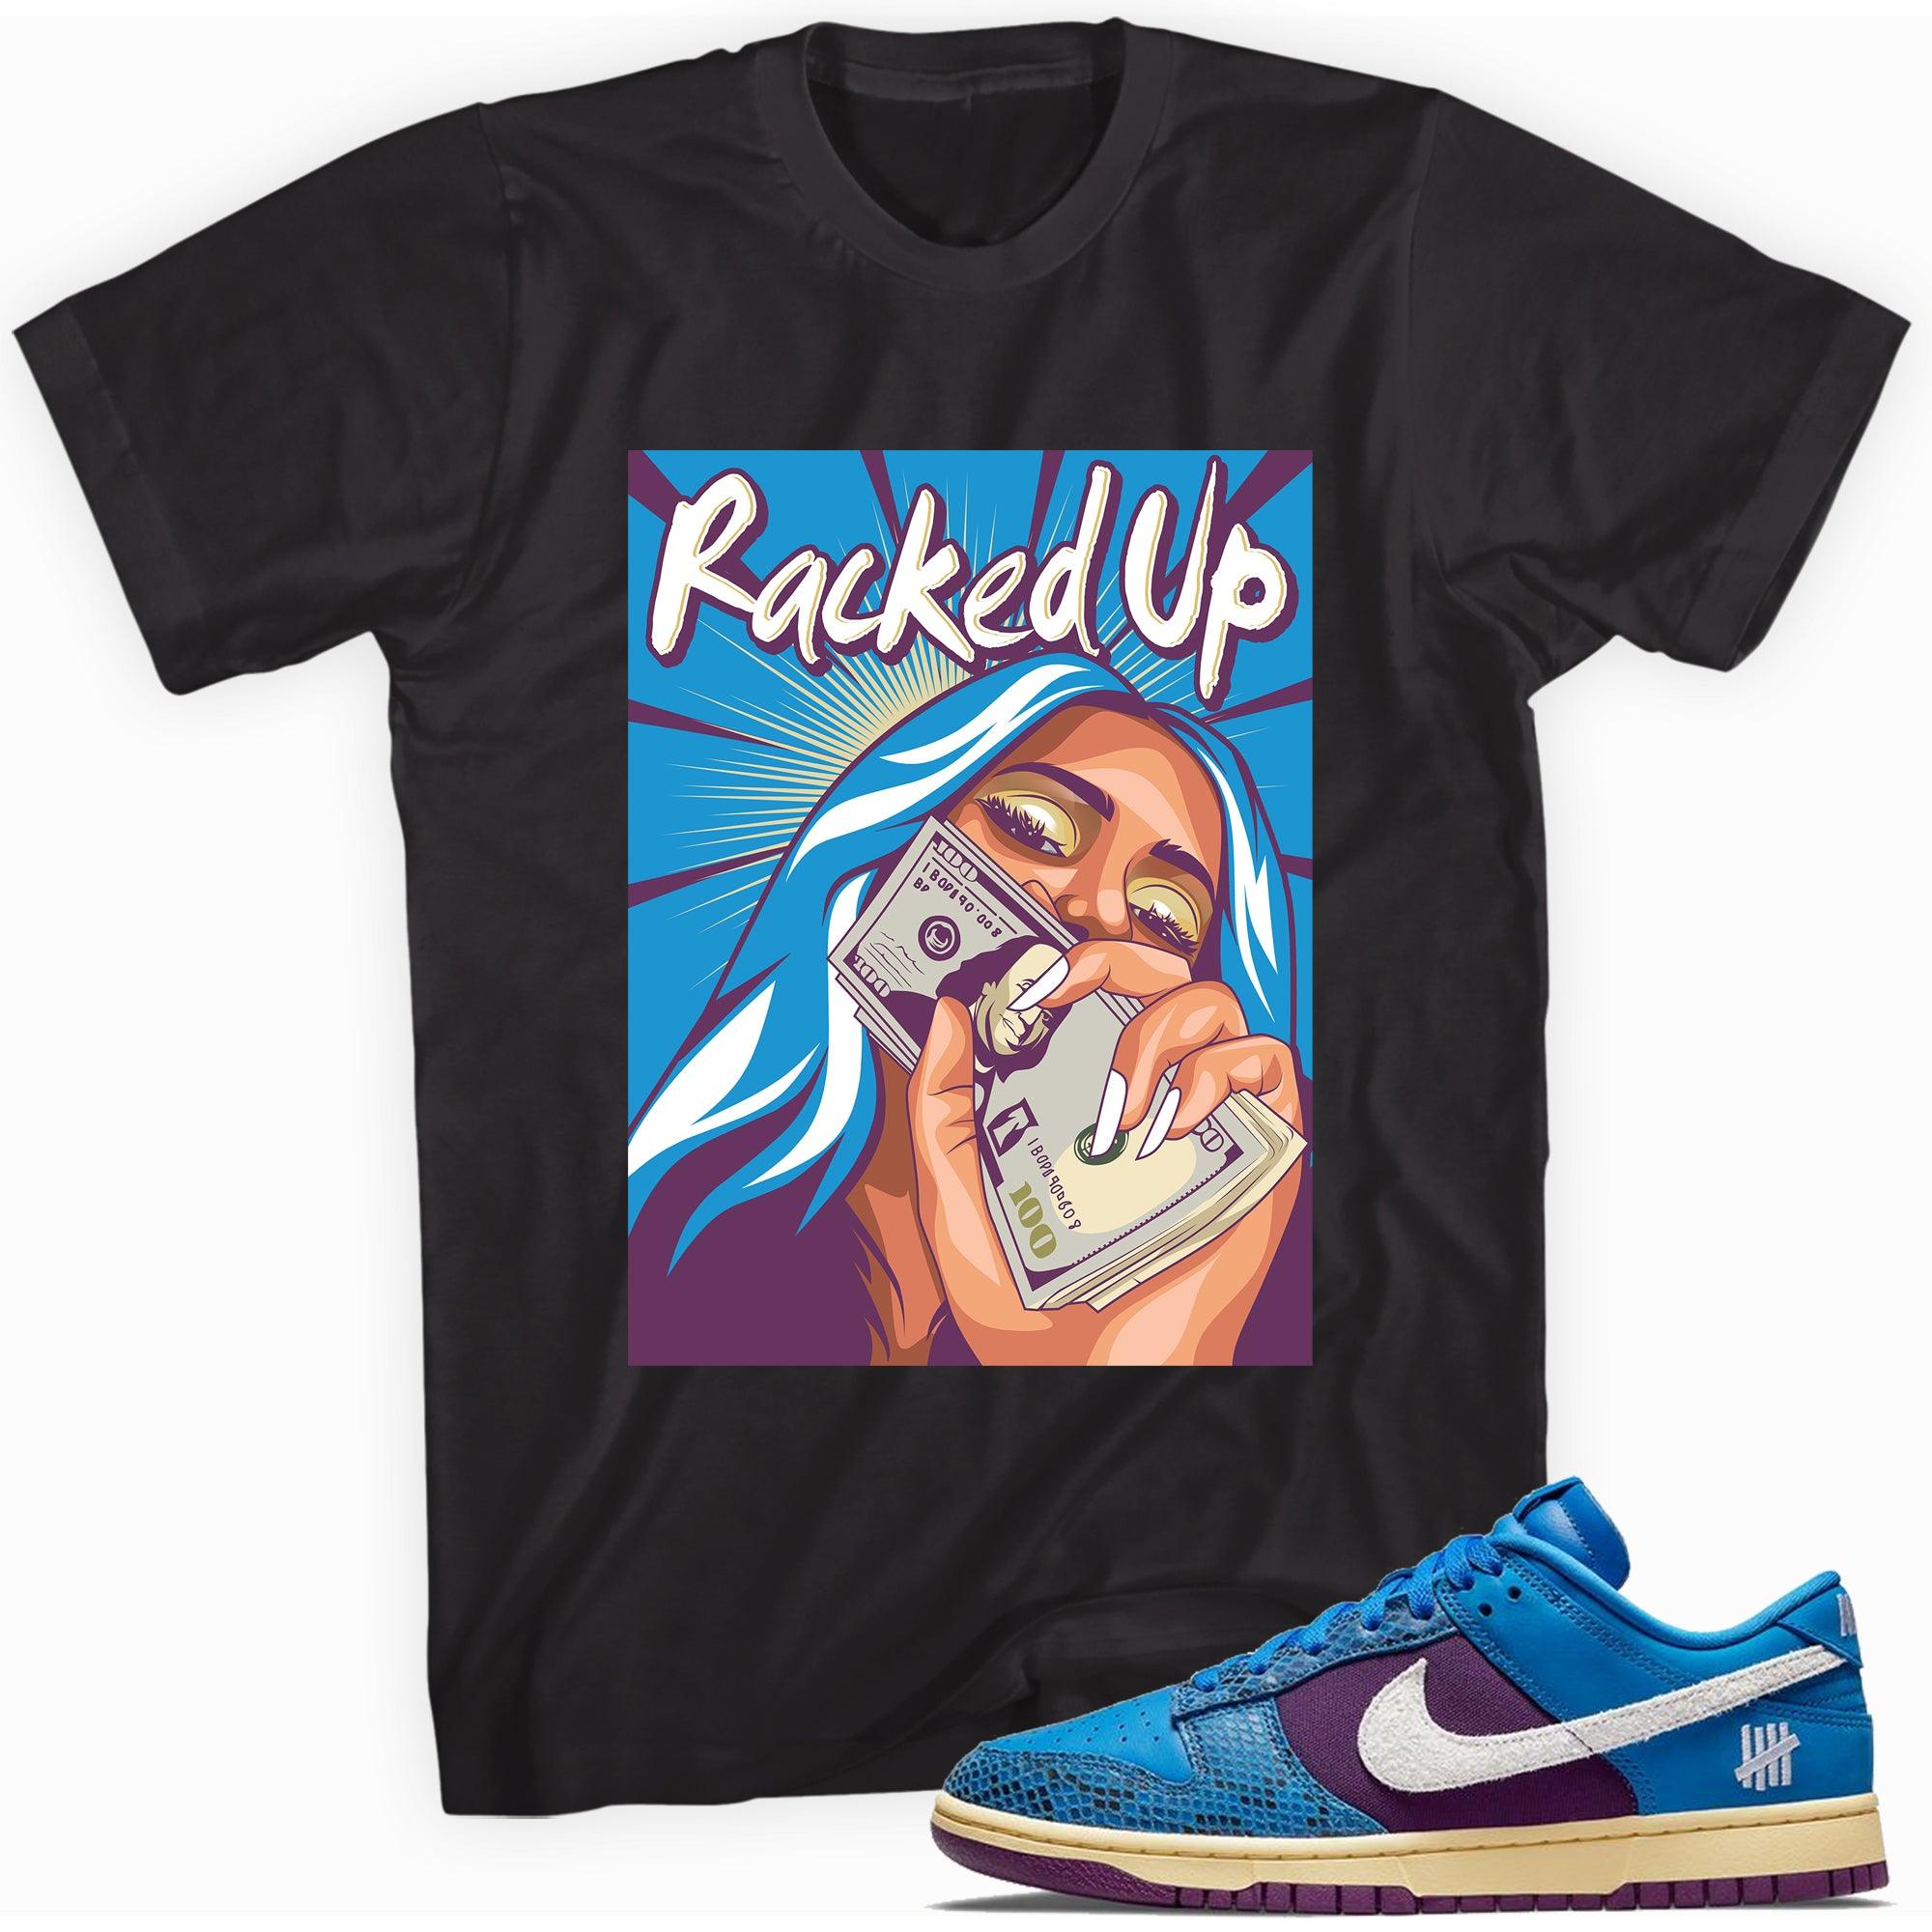 Racked Up Shirt Nike Dunk Low Undefeated 5 On It Dunk vs AF1 Sneakers photo